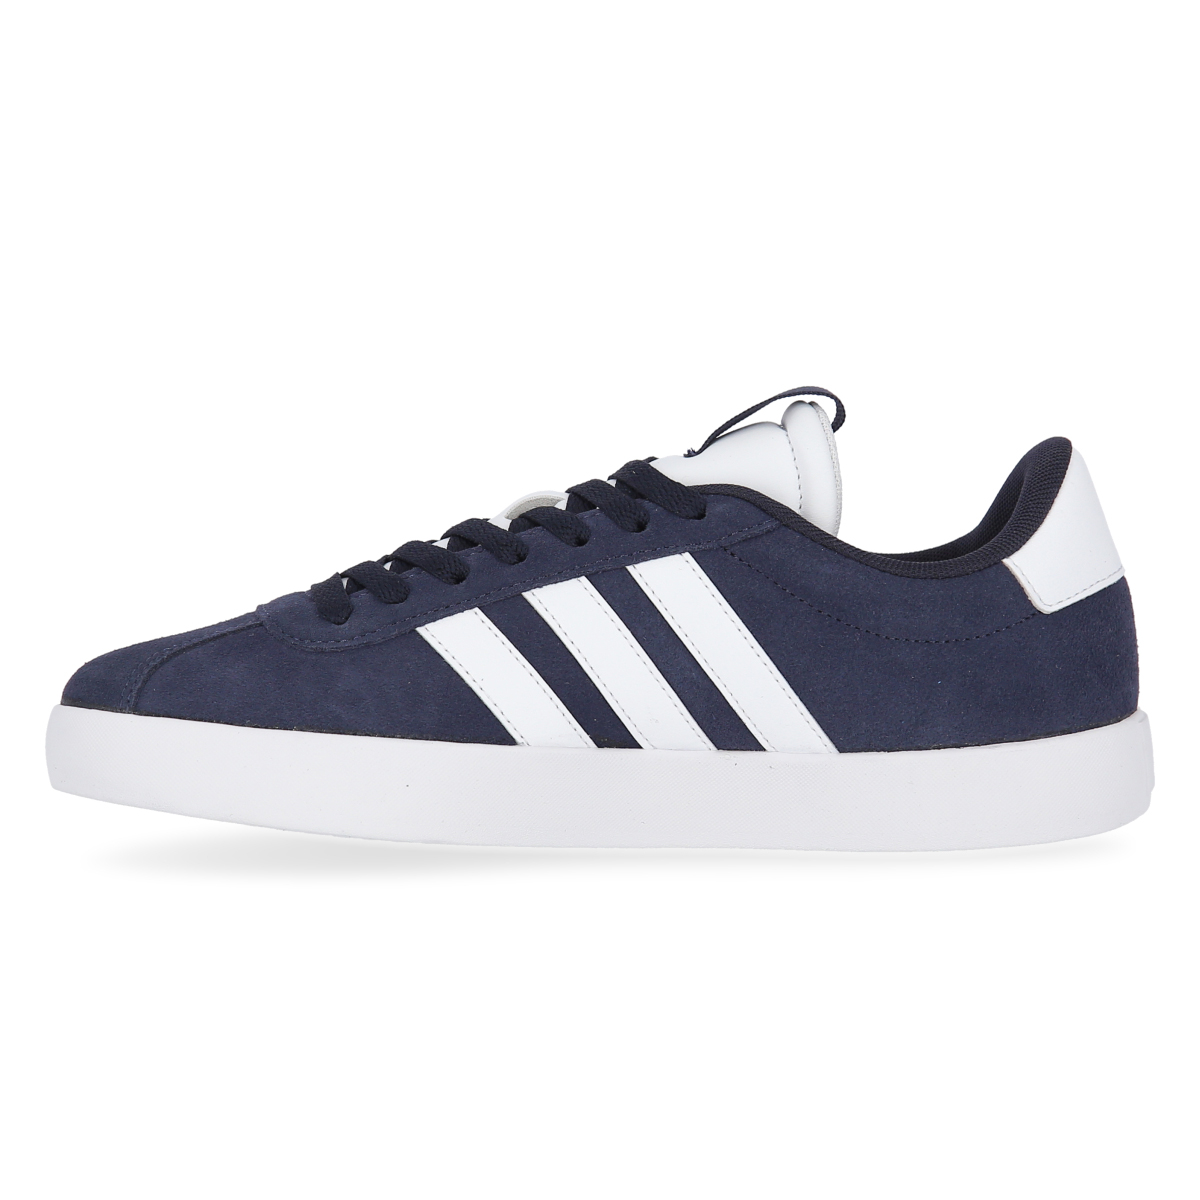 Zapatillas adidas Vl Court 3.0 Hombre,  image number null